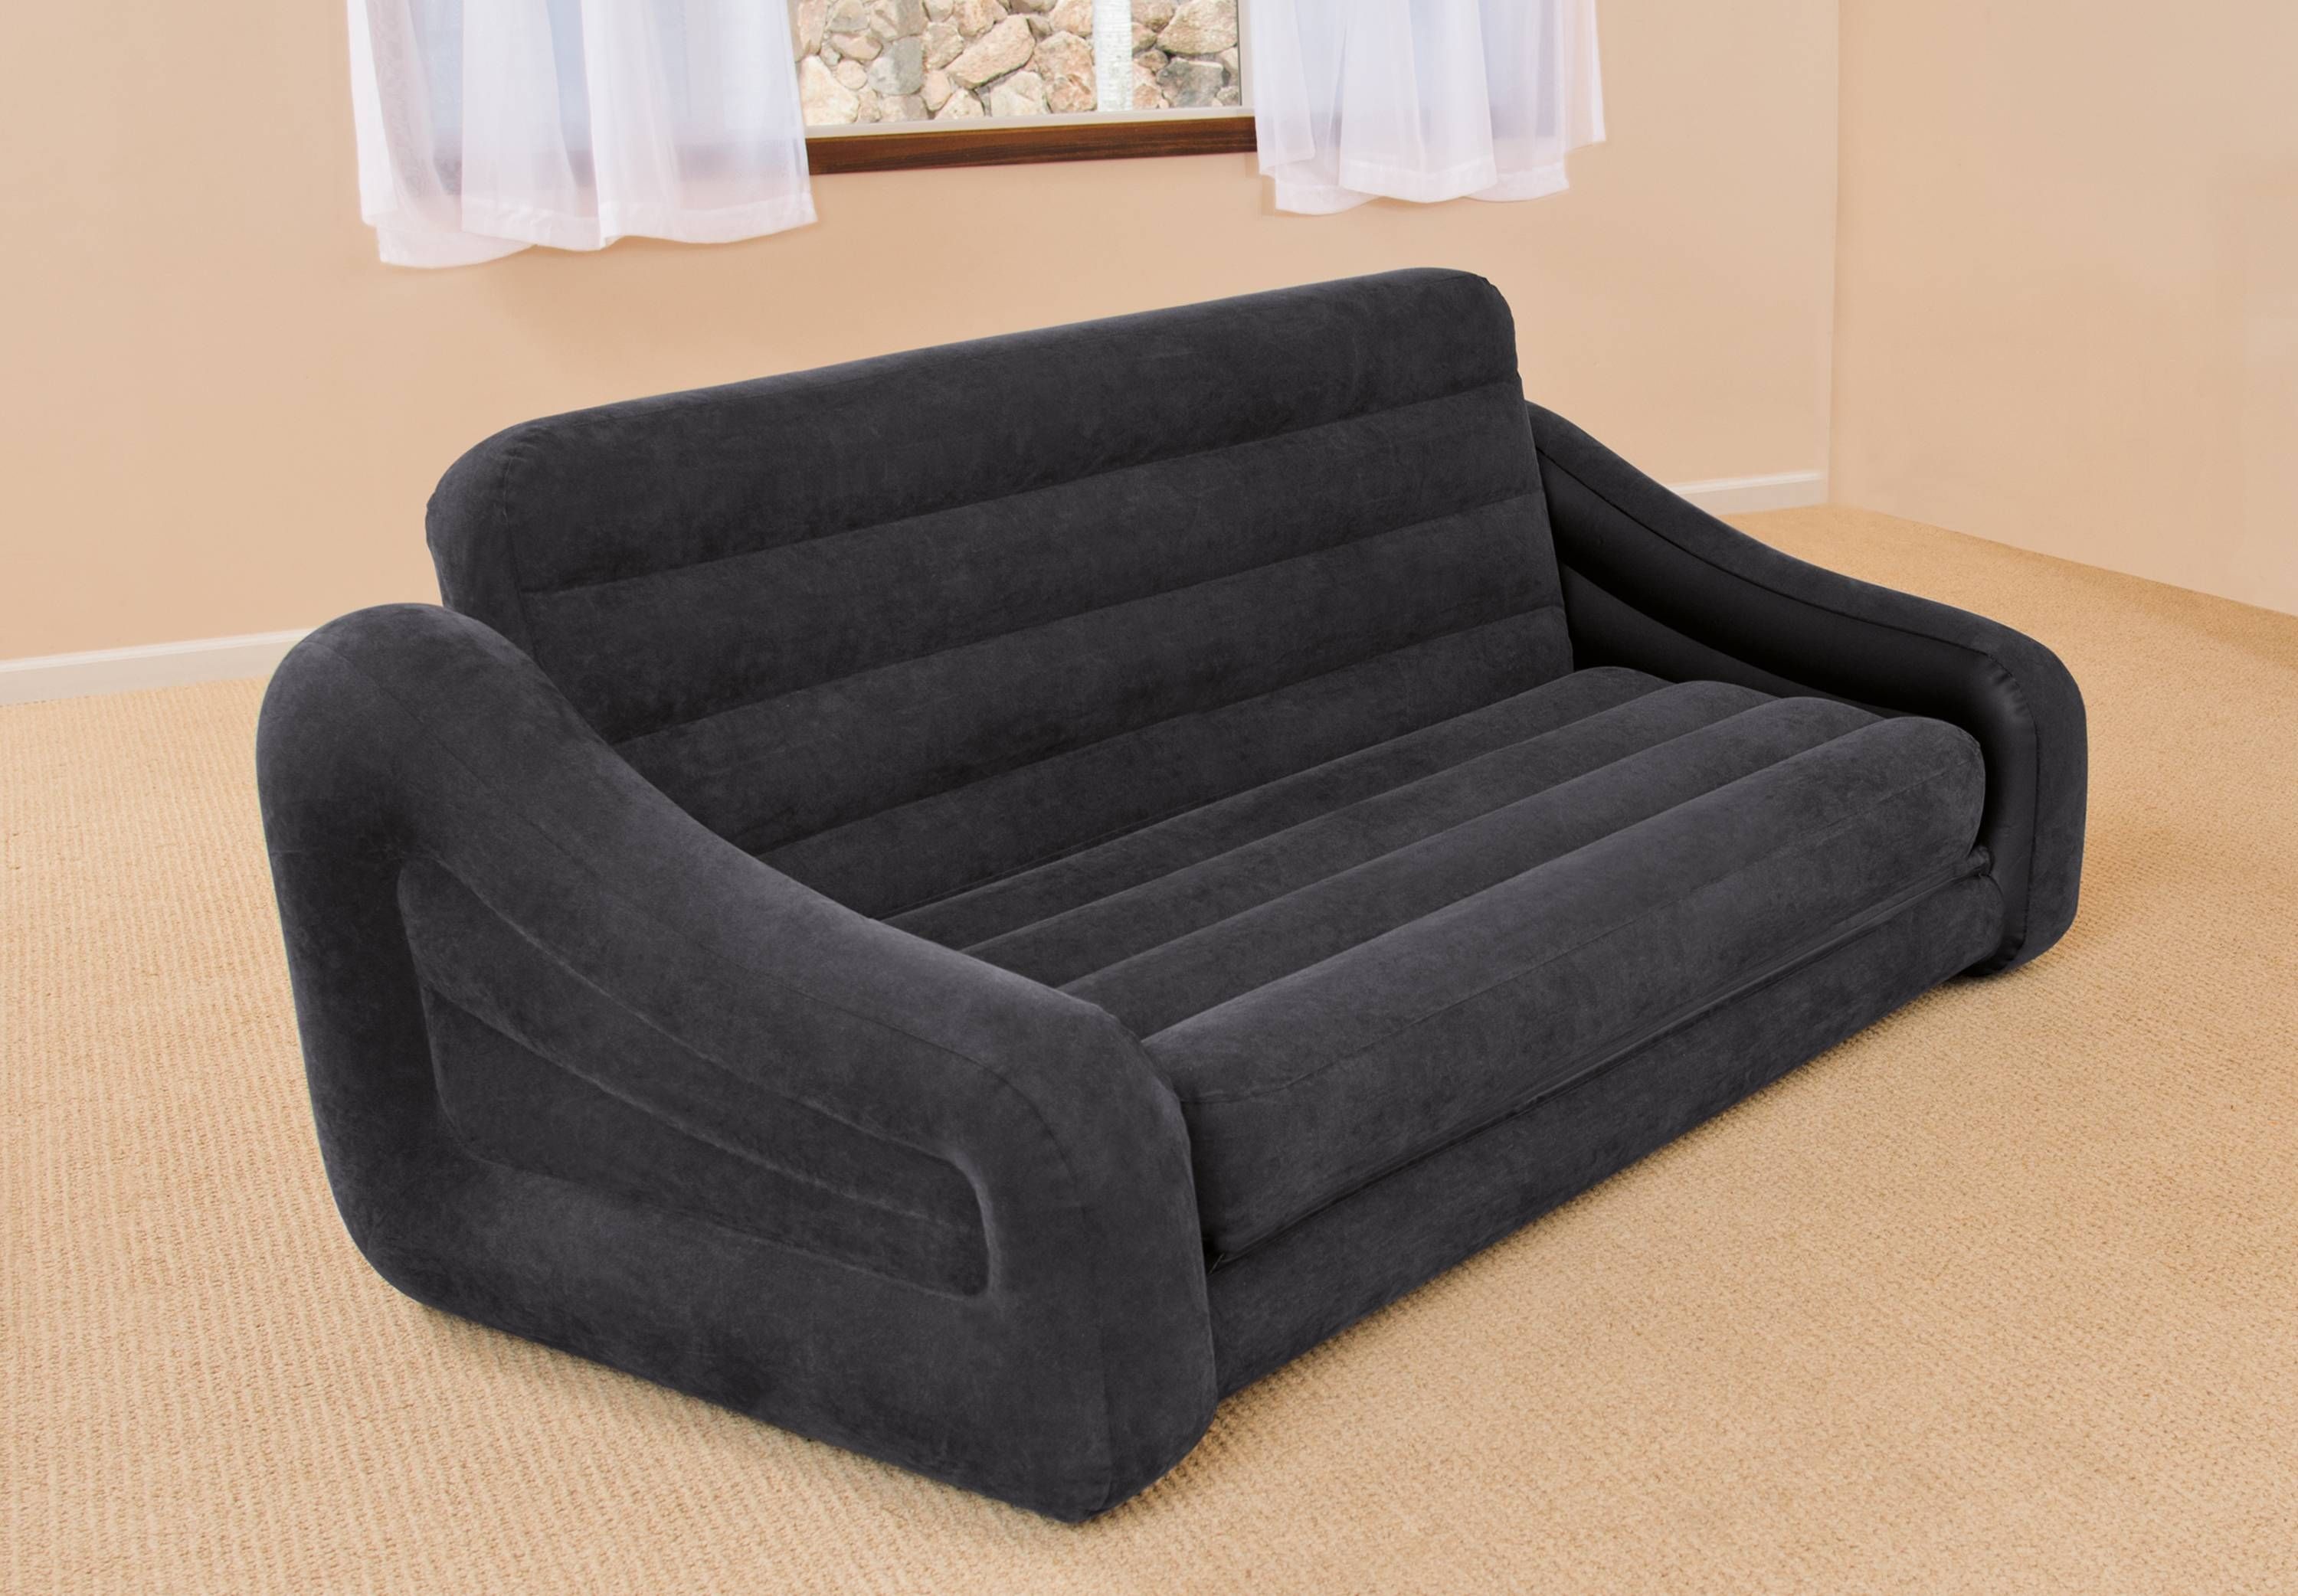 Sofas Center : Pull Out Sofa Mattress Replacement For Best Sizes Throughout Sofas Mattress (View 8 of 15)